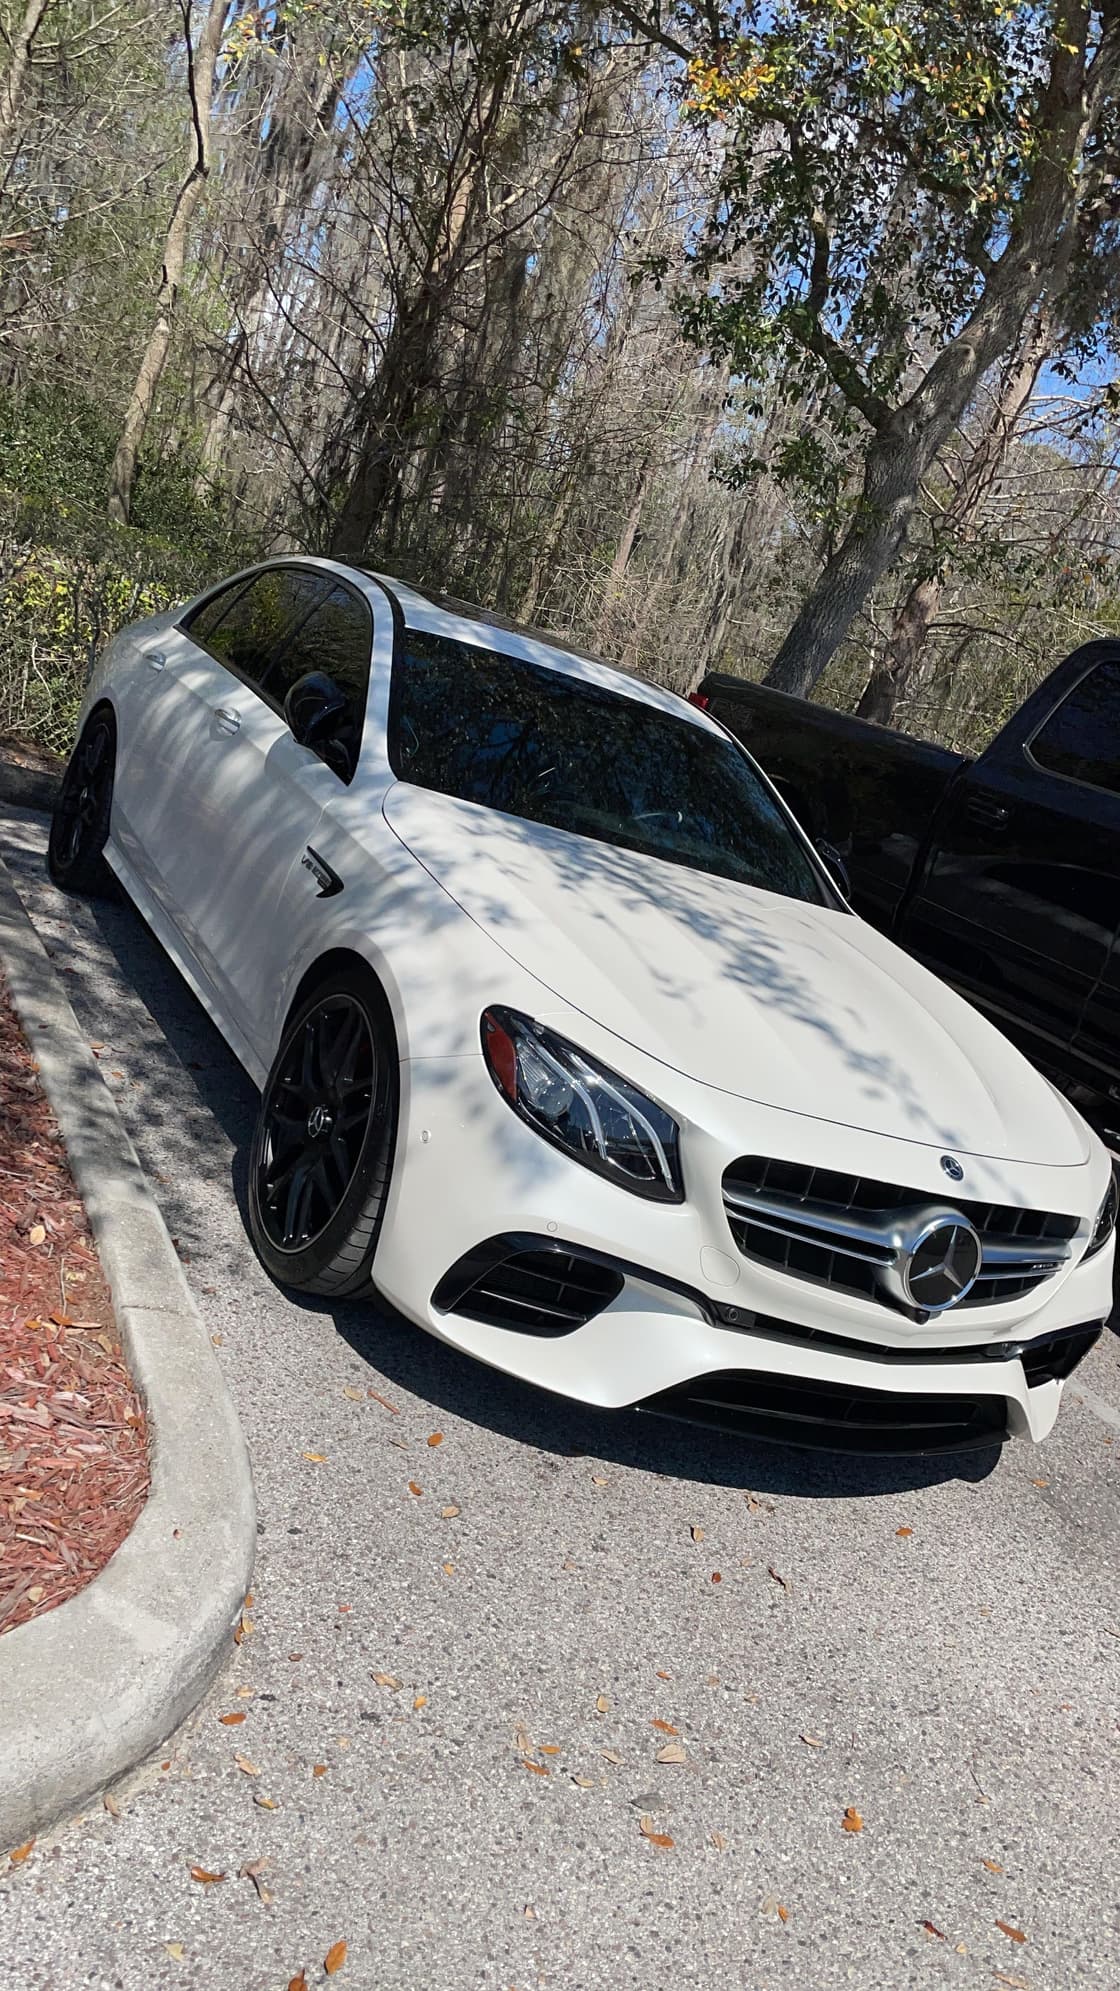 2018 Mercedes-Benz E63 AMG S - 2018 MERCEDES BENZ E63S FOR SALE!!! - Used - VIN WDDZF8KB3JA400123 - 31,658 Miles - 8 cyl - AWD - Automatic - Sedan - White - Tampa, FL 33647, United States